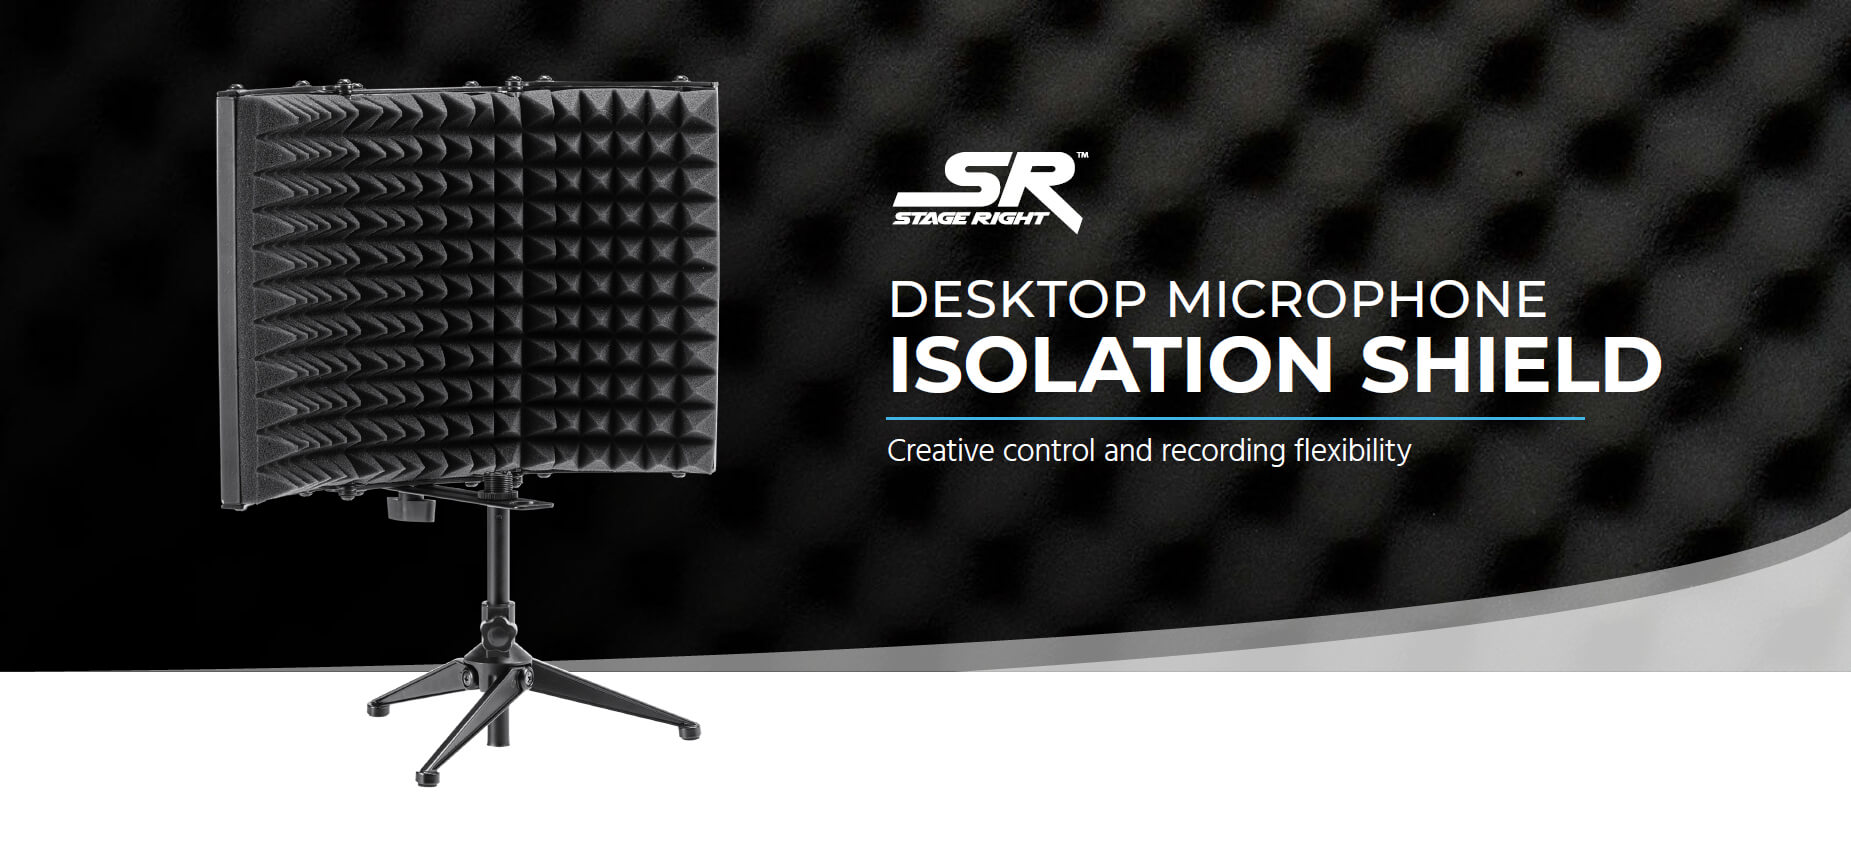 Stage Right by Monoprice Desktop Microphone Isolation Shield